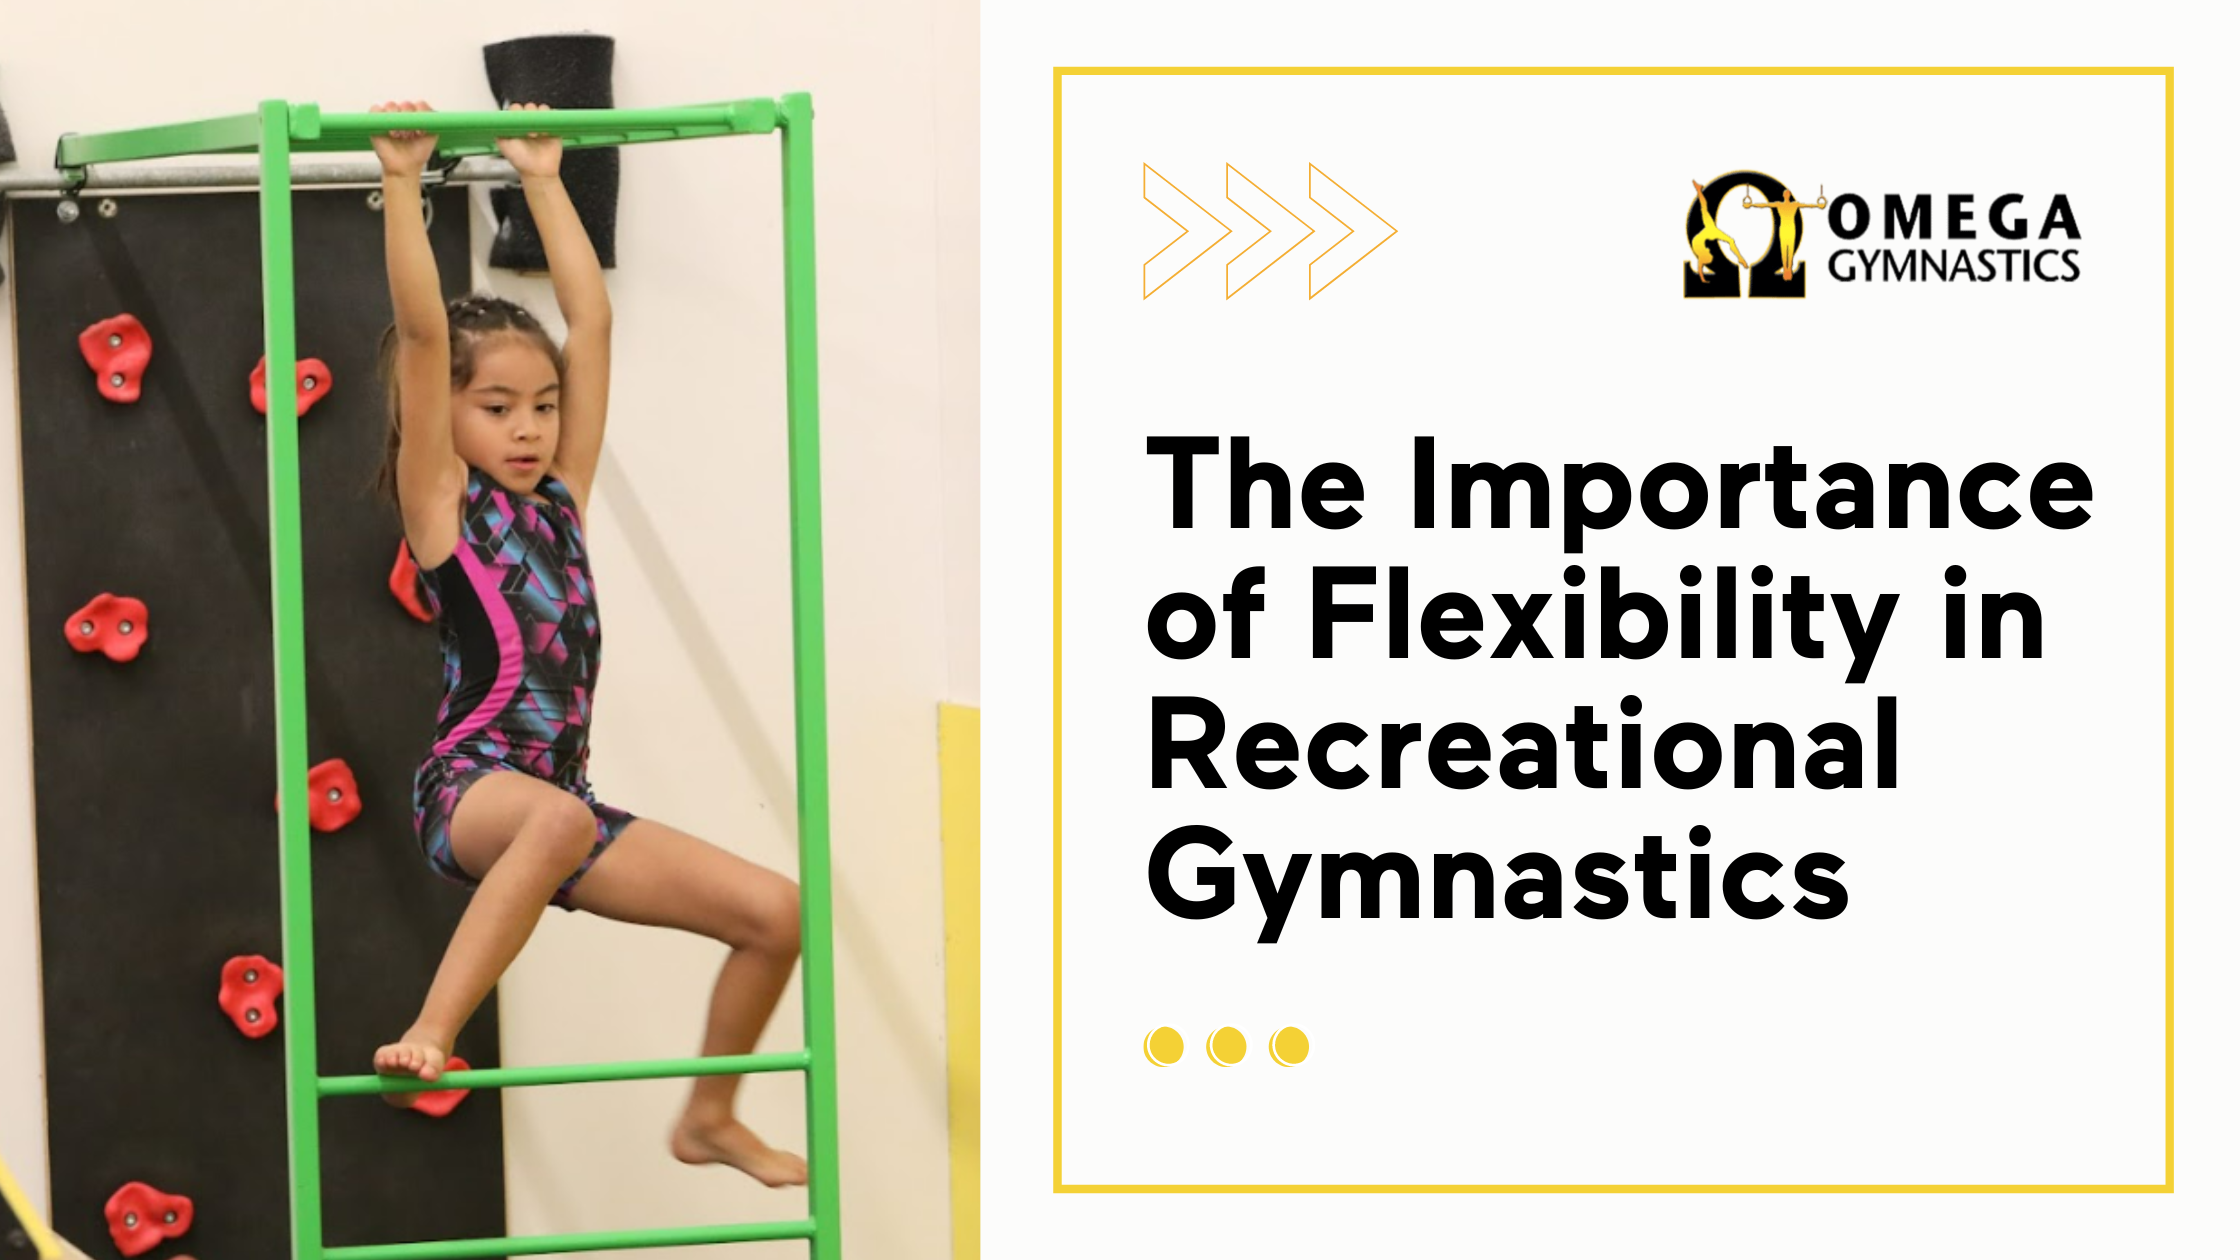 The Importance of Flexibility in Recreational Gymnastics